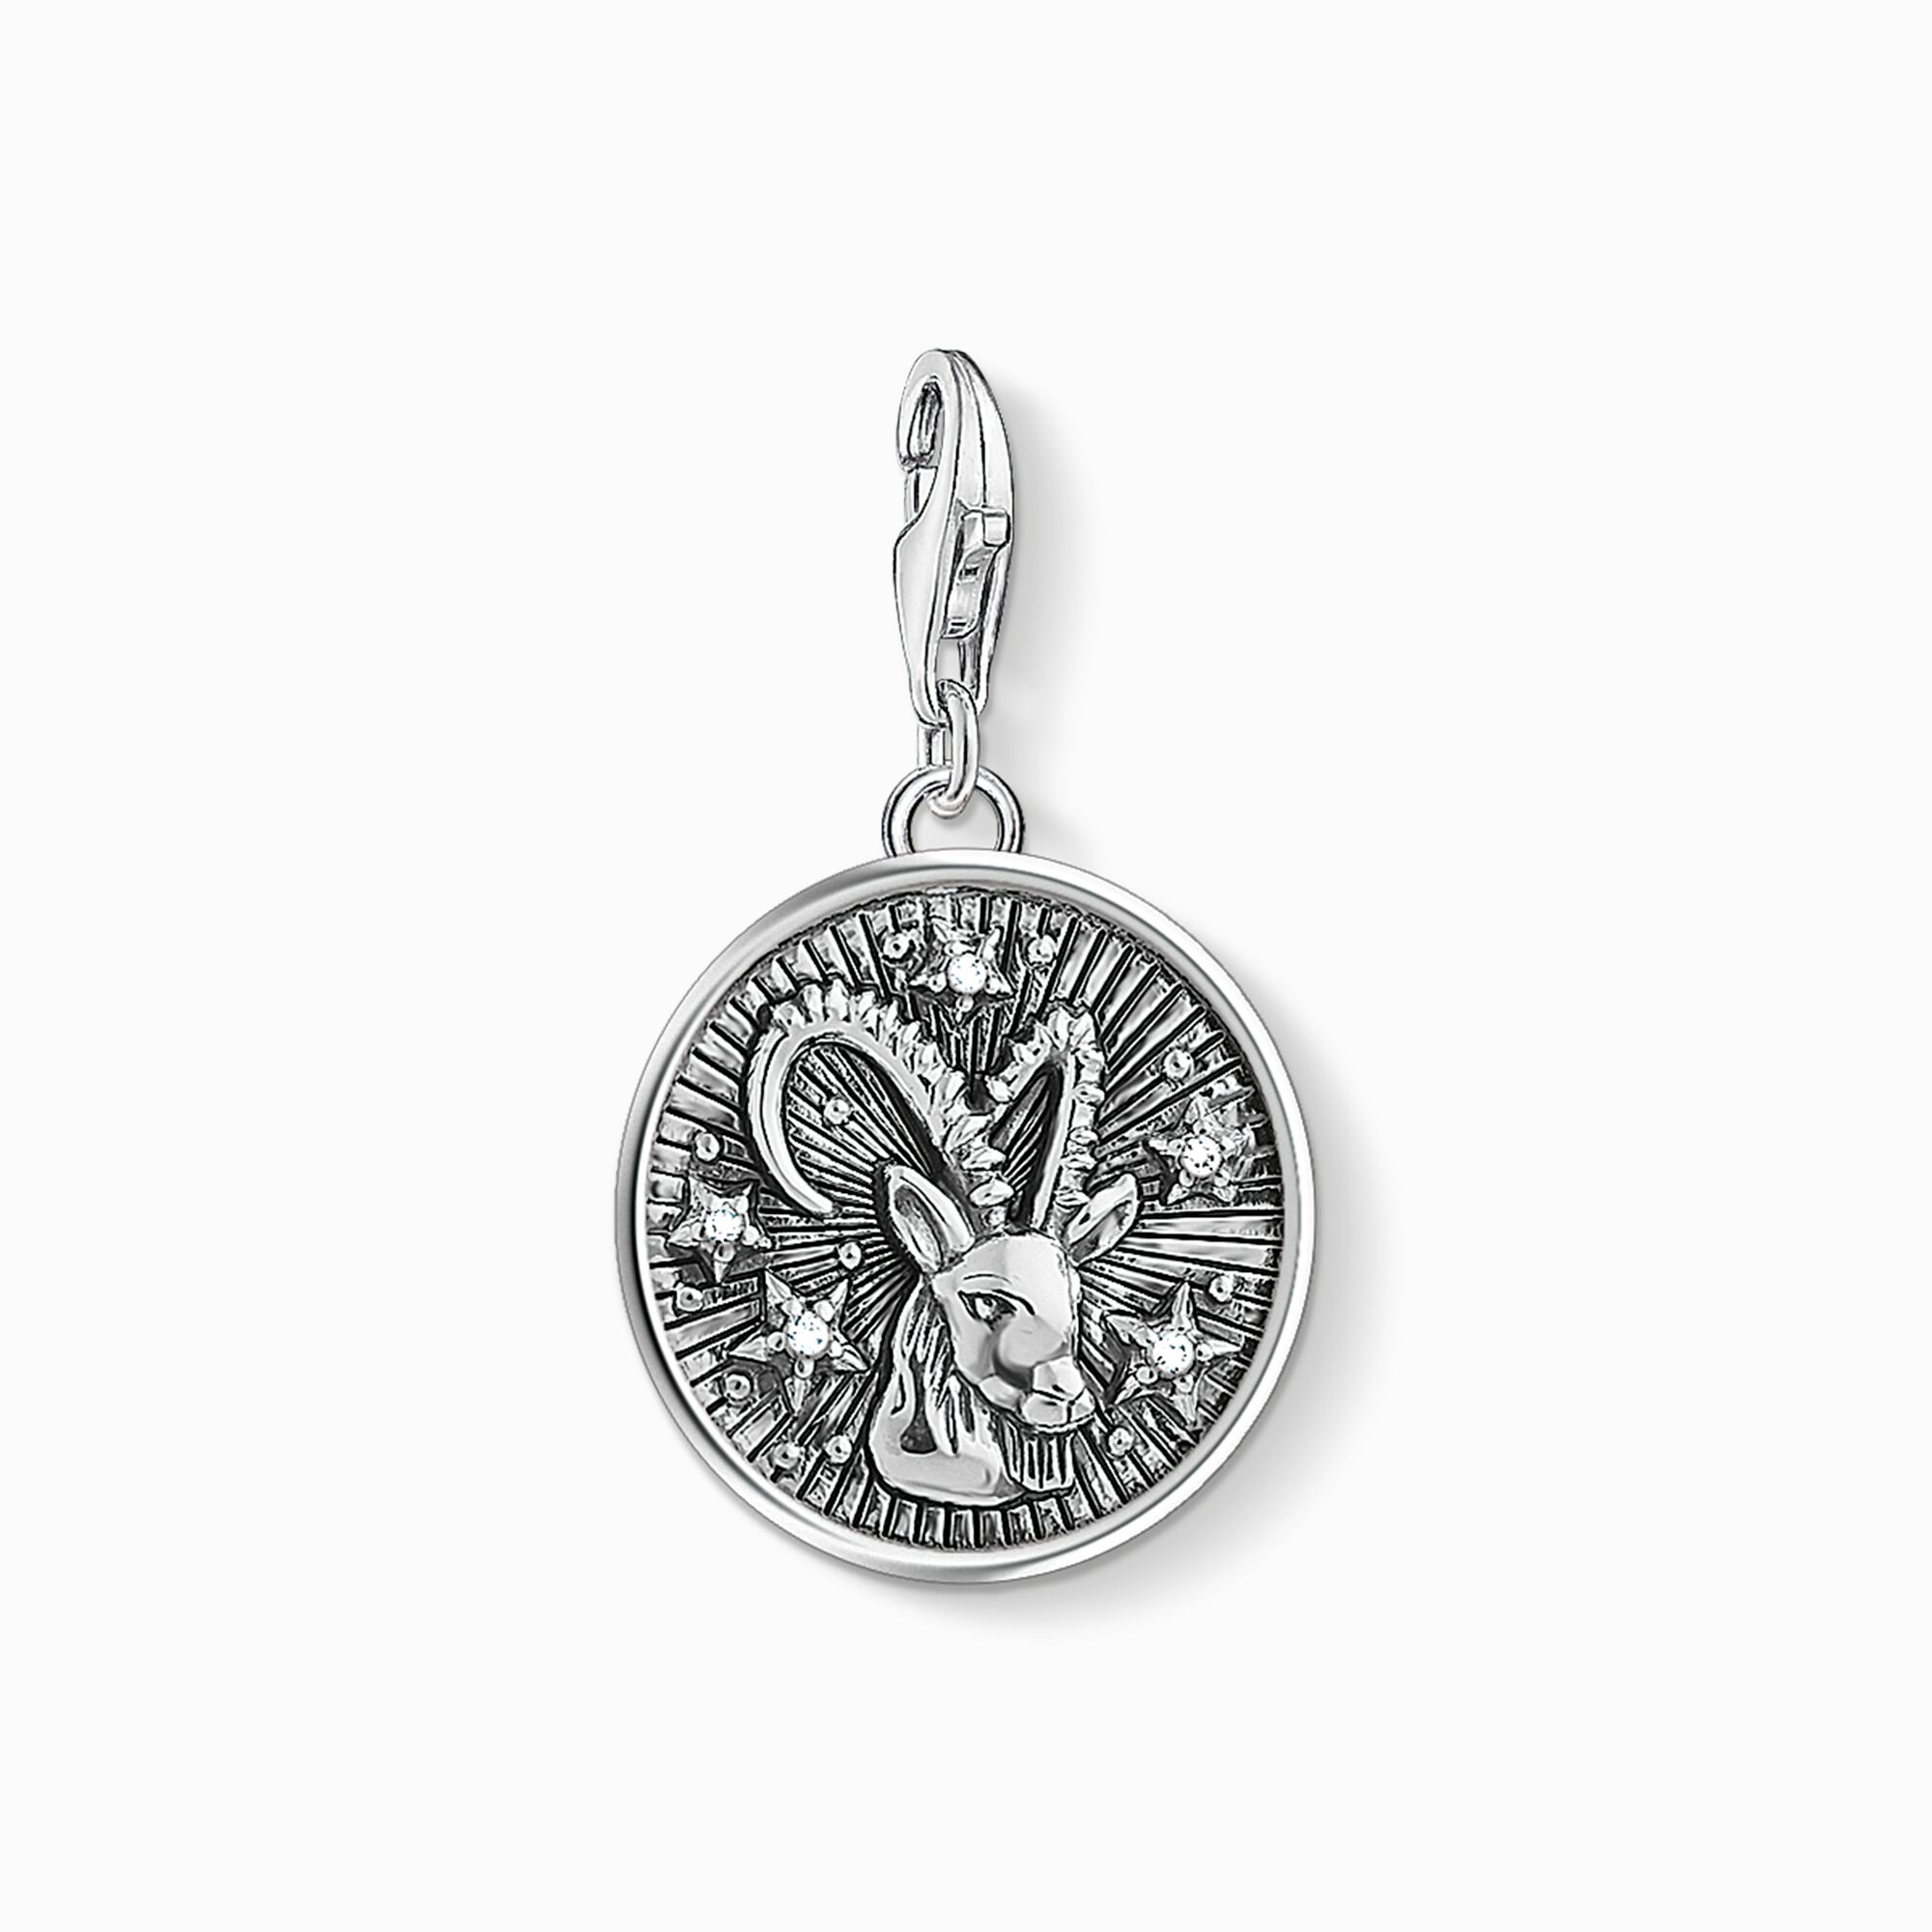 Charm pendant zodiac sign Capricorn from the Charm Club collection in the THOMAS SABO online store